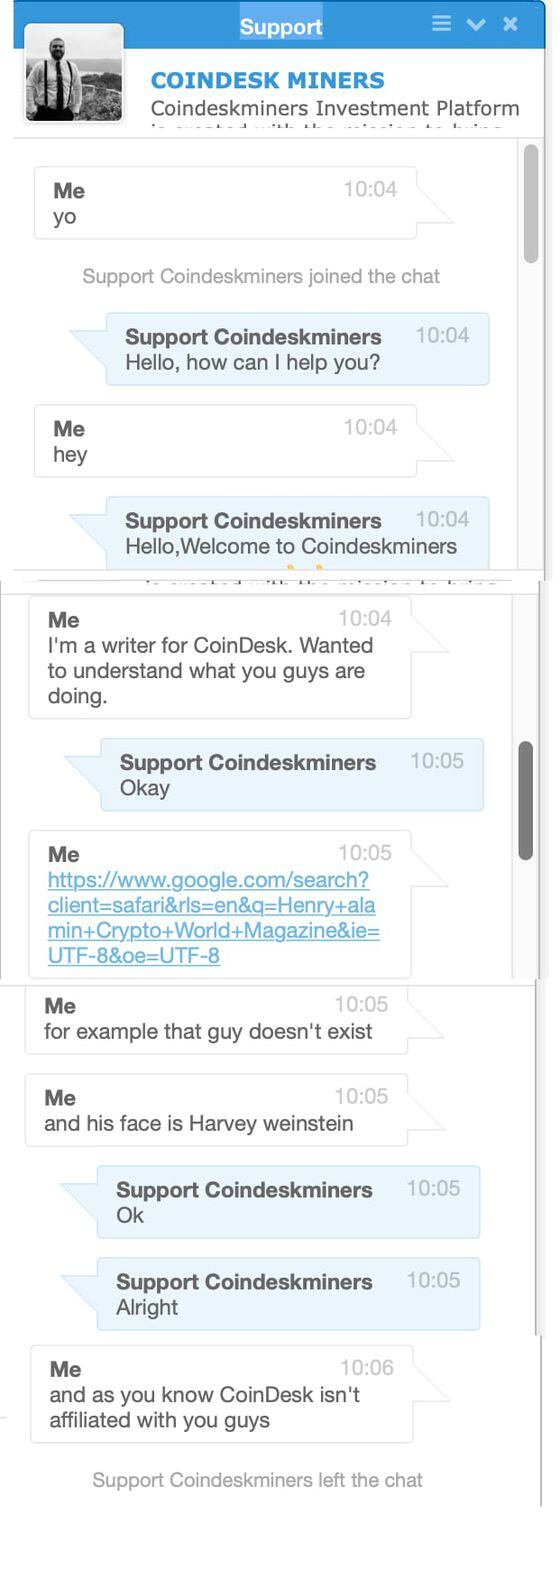 A chat with the Coindeskminers team didn't go well.